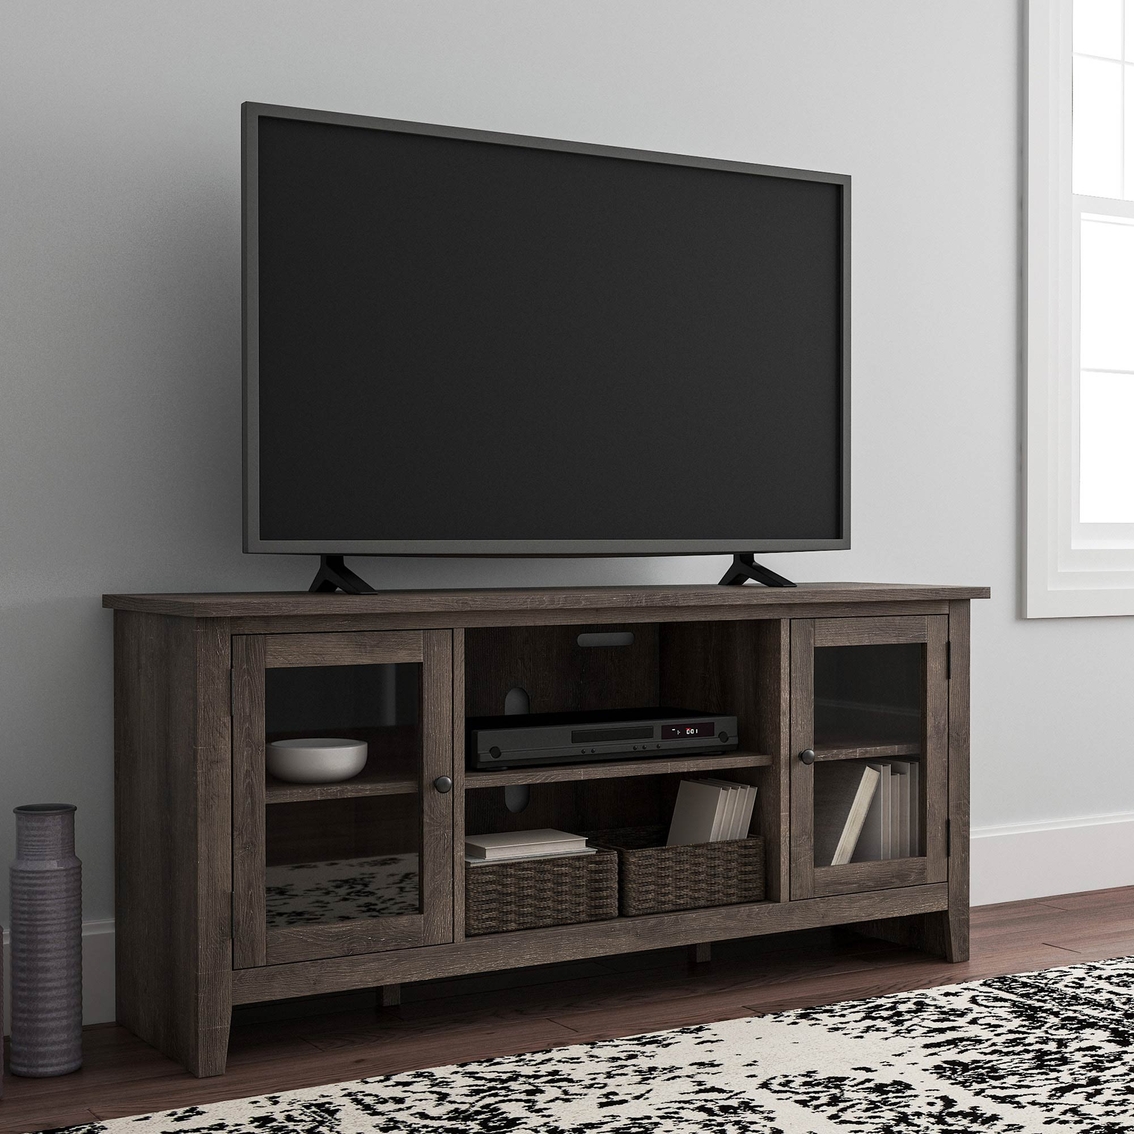 Signature Design by Ashley Arlenbry Large 60 in. Wide TV Stand - Image 5 of 5